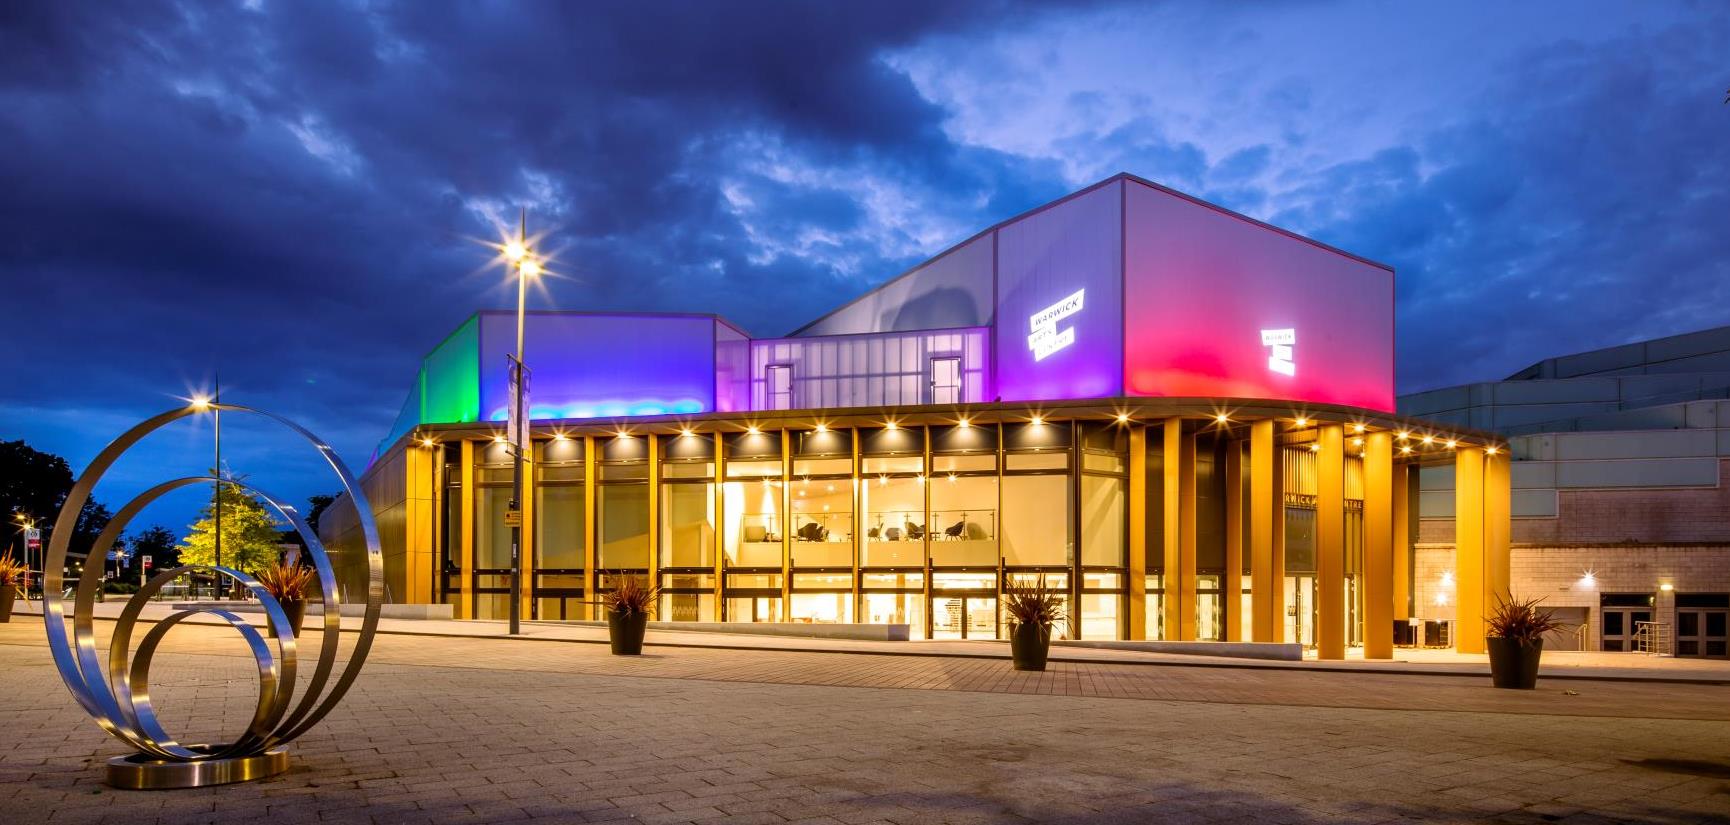 Photograph of the Warwick Arts Centre building. Lit up at night.